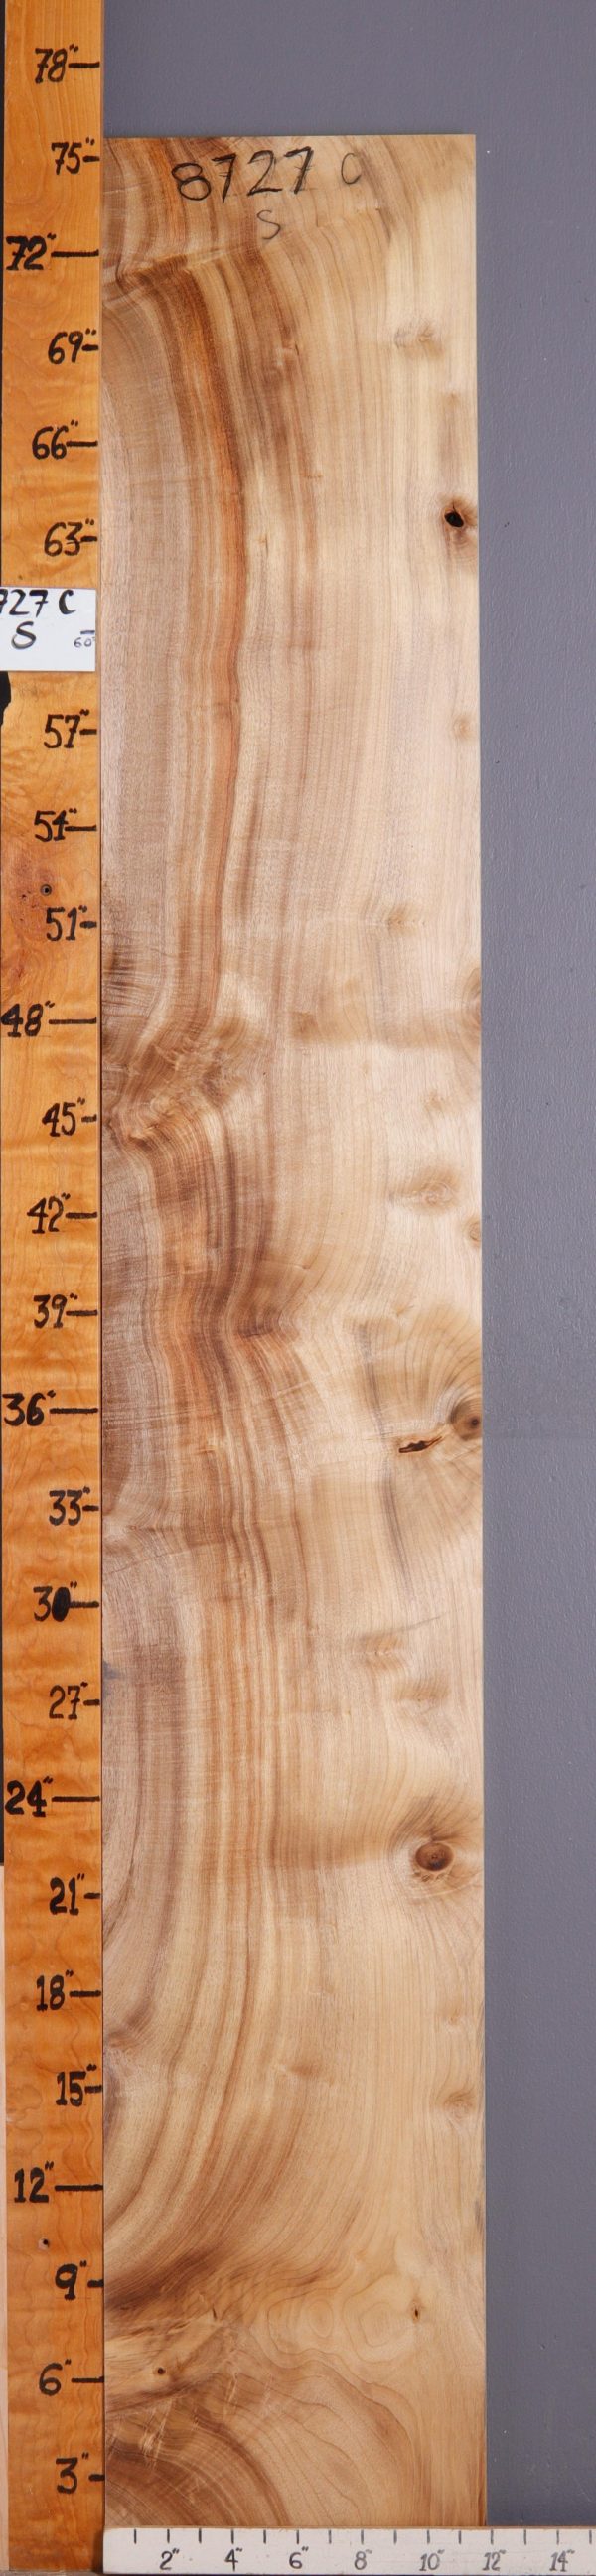 5A Curly Myrtlewood Lumber 11"3/4 X 75" X 4/4 (NWT-8727C)